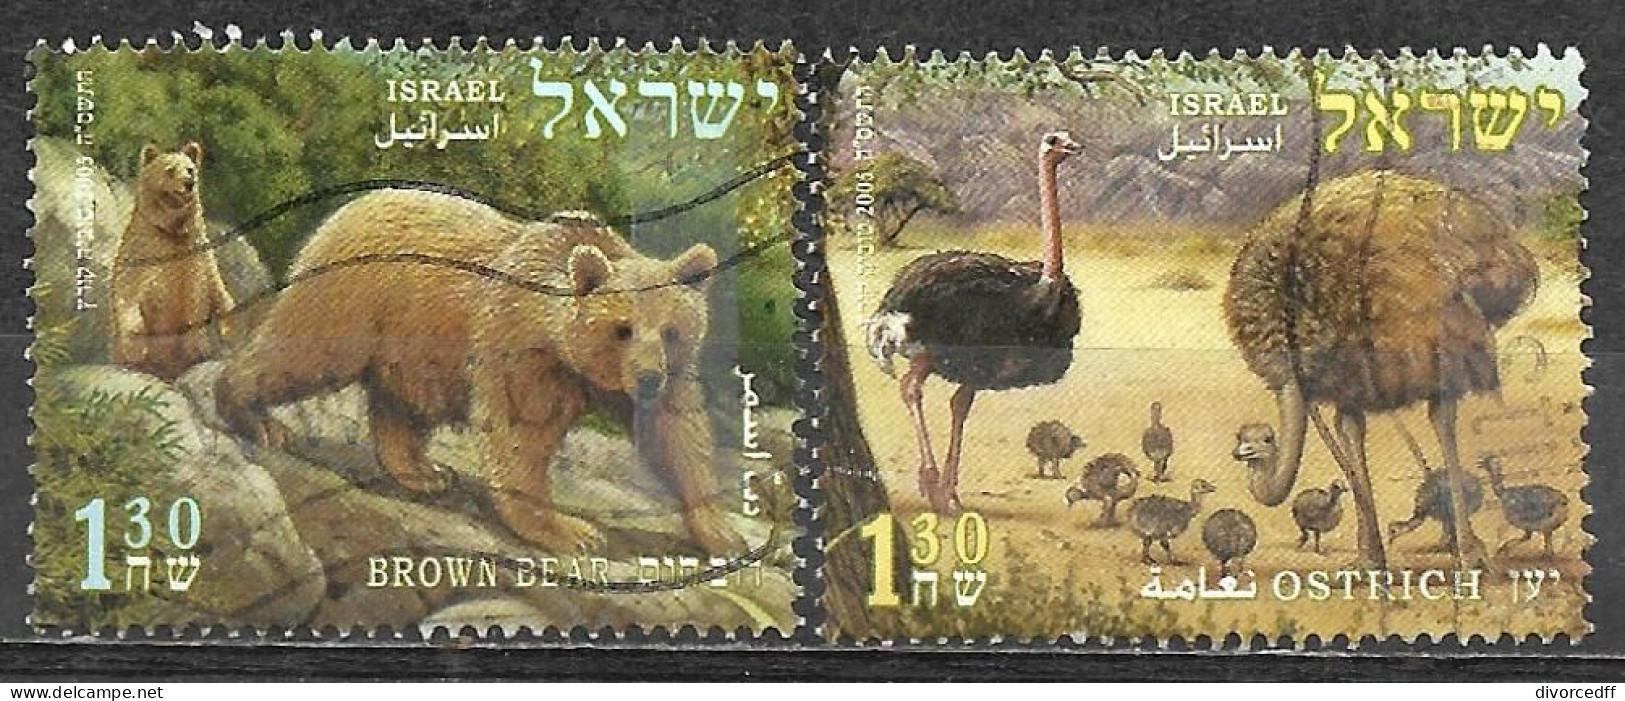 Israel 2005 Used Stamps Animals From The Bible Bear Ostrich [INLT19] - Usati (senza Tab)